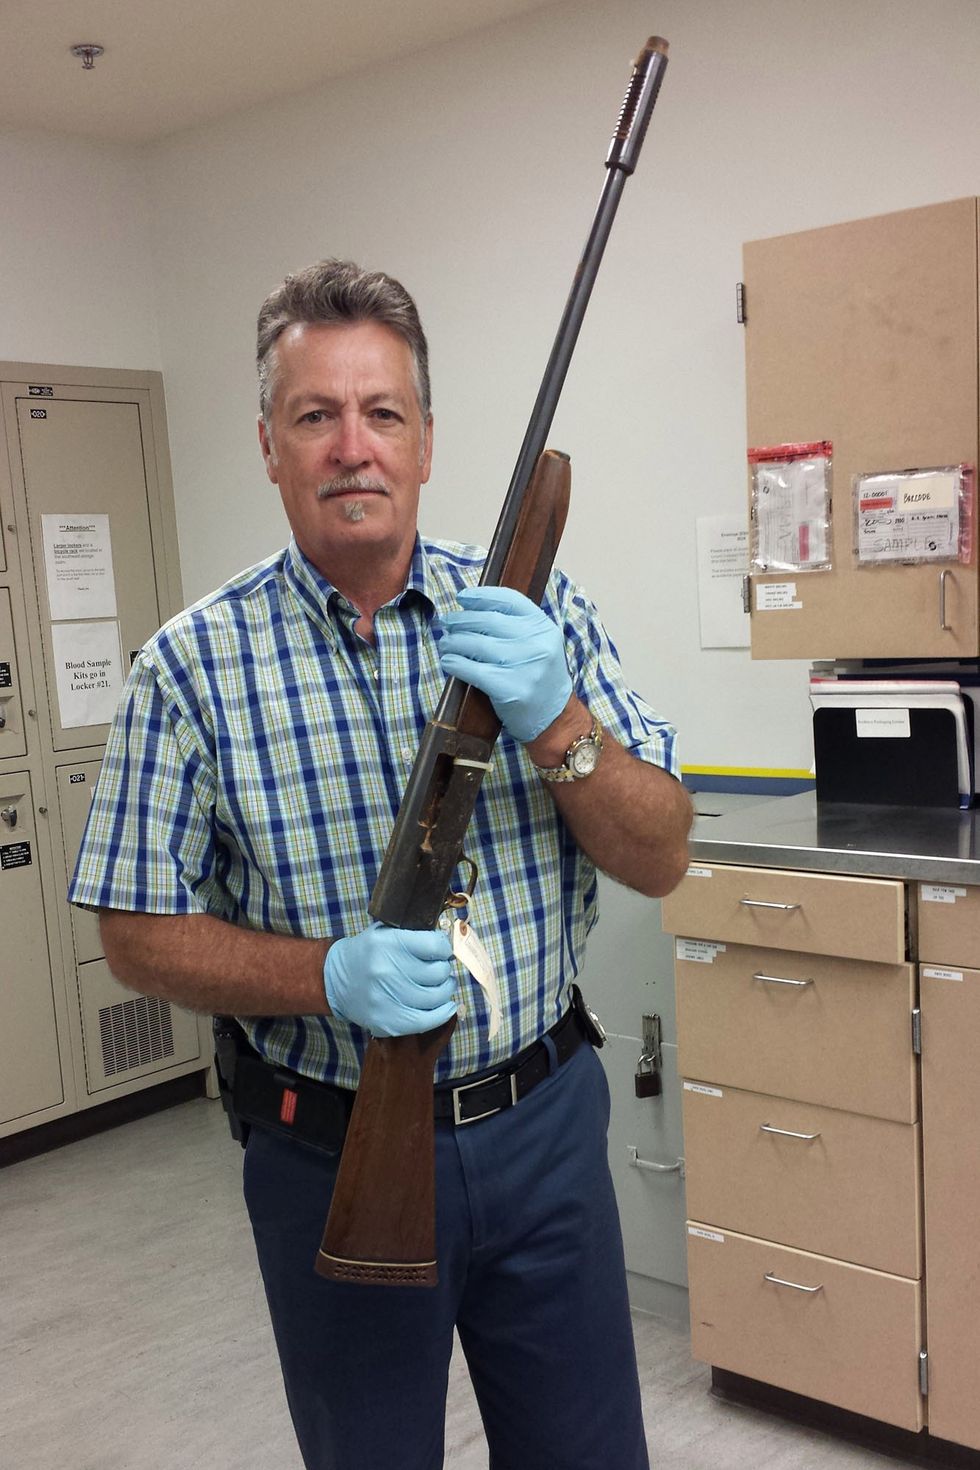 Seattle Police Release Photos of the Shotgun Kurt Cobain Used in Suicide